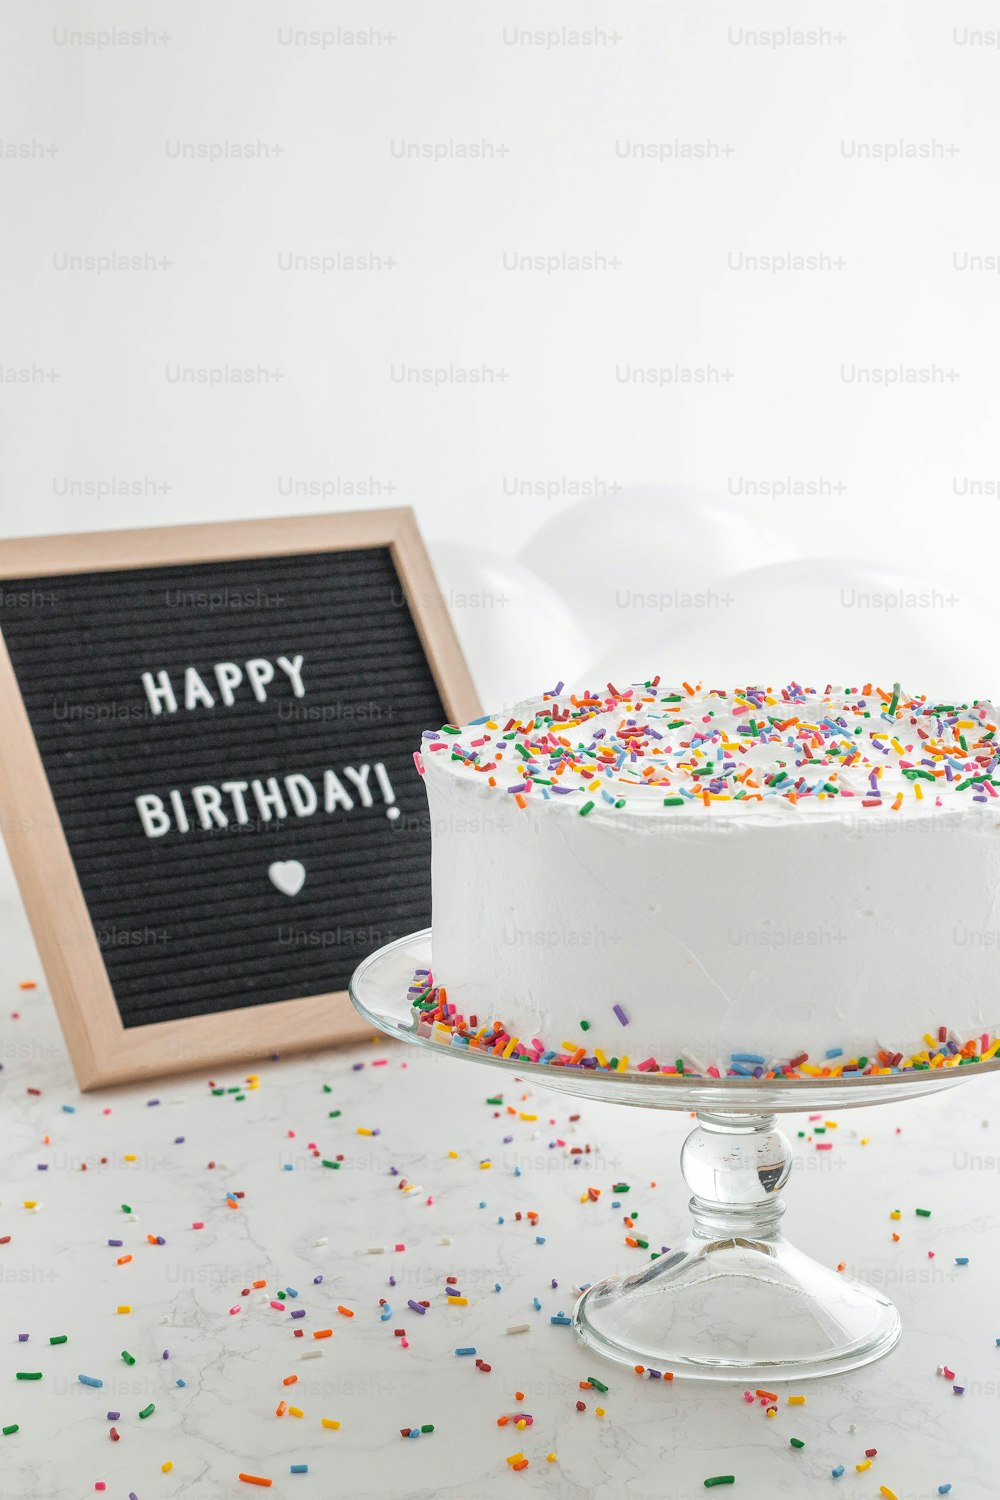 a birthday cake with sprinkles and a chalkboard sign